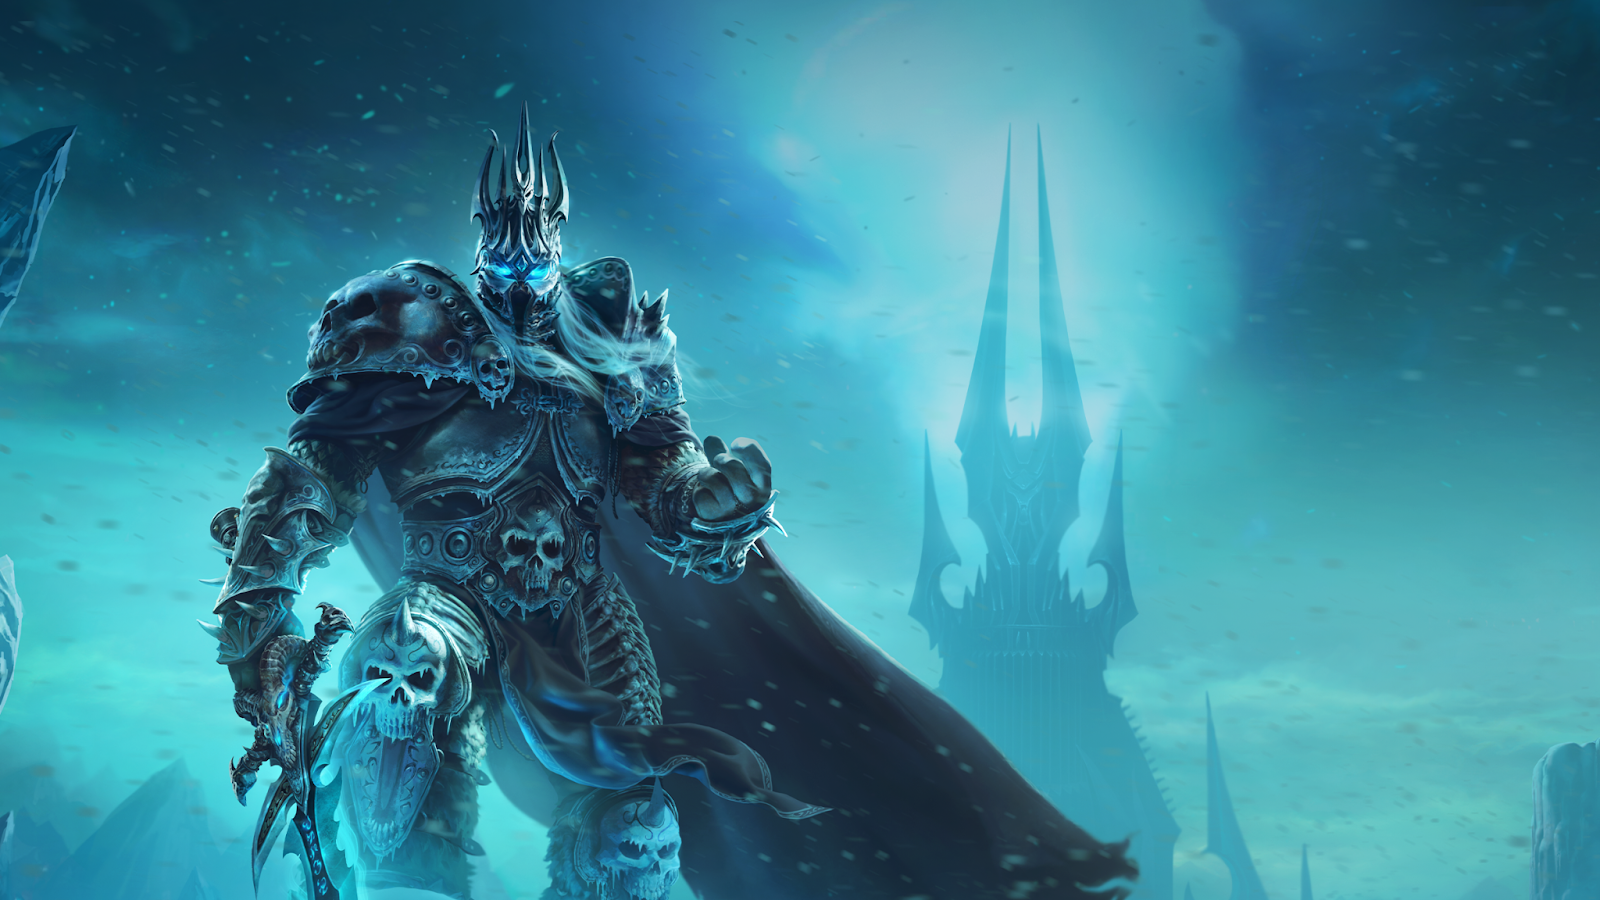 World of Warcraft: Wrath of the Lich King - Lich King in front of the castle